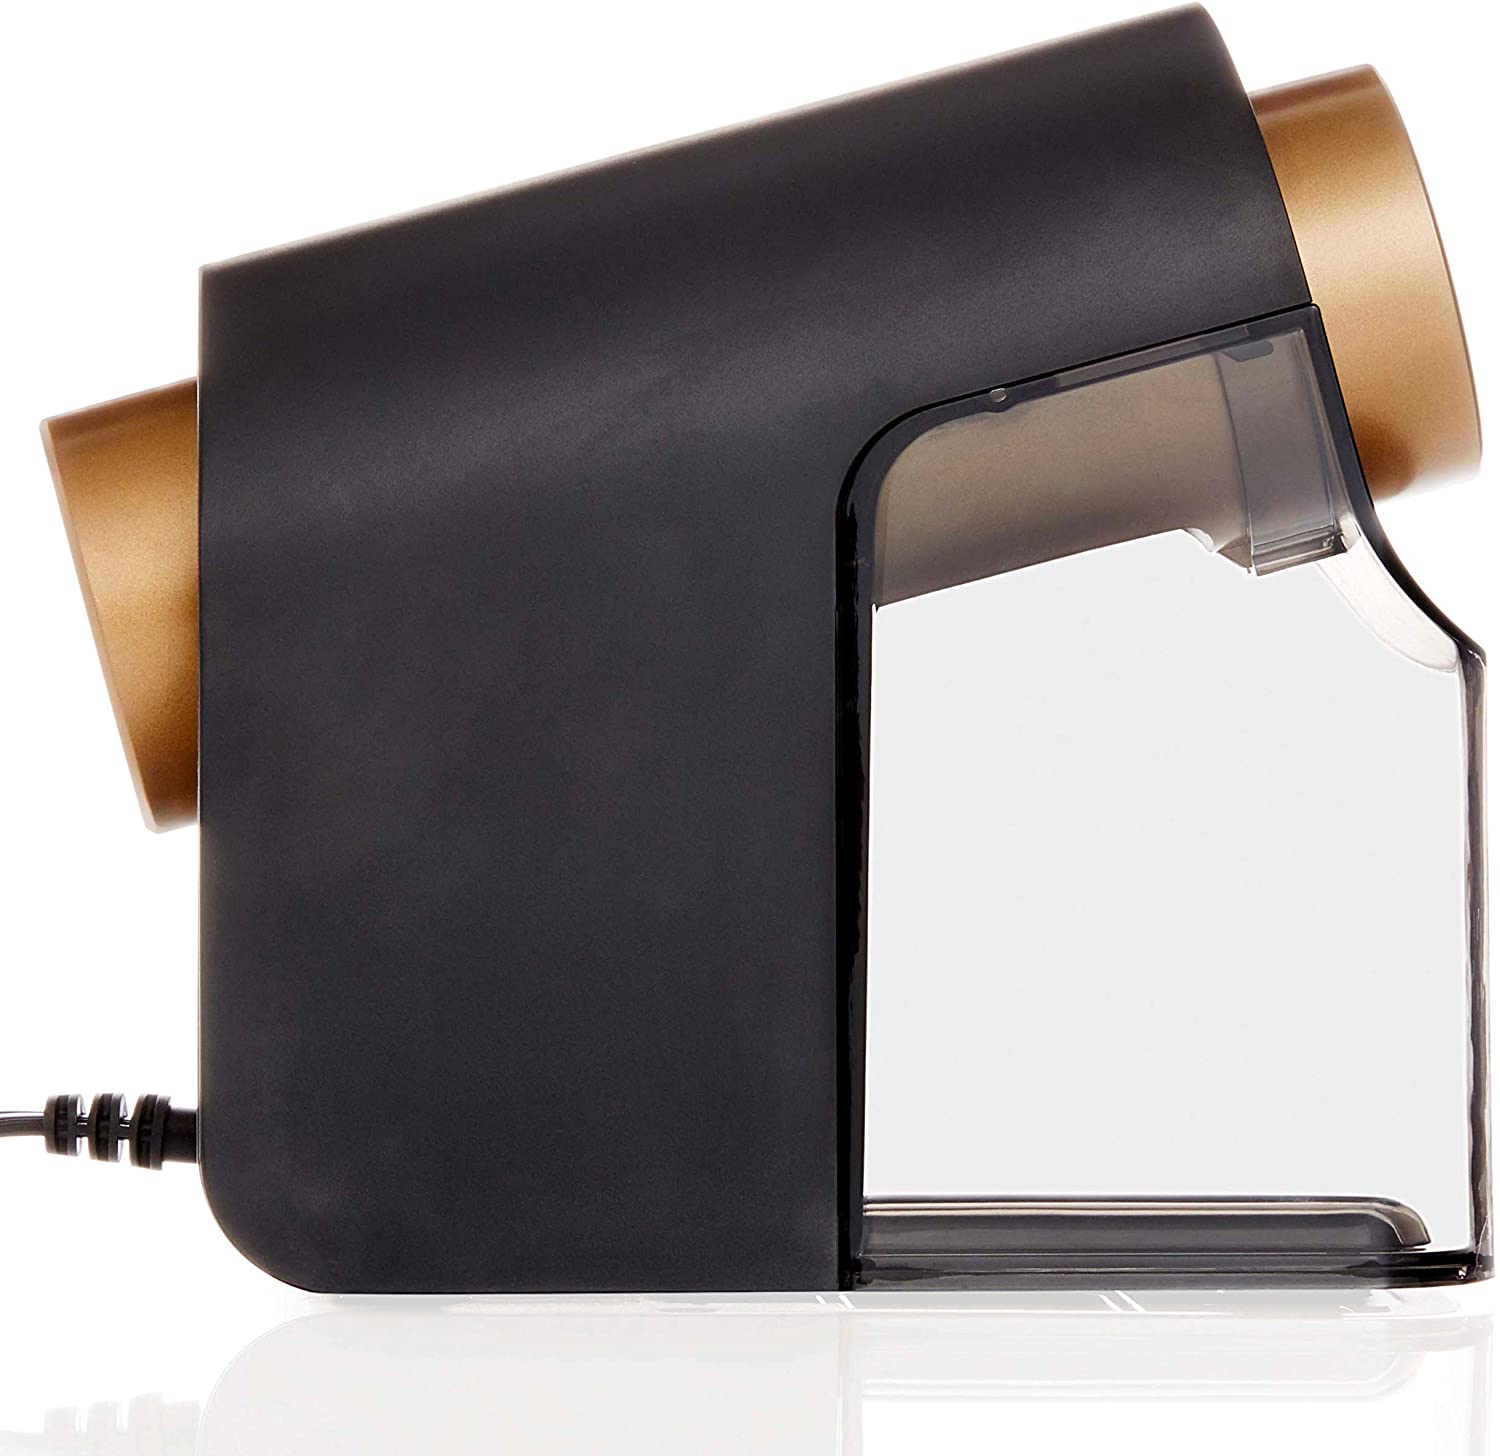 X-ACTO Pencil Sharpener side view